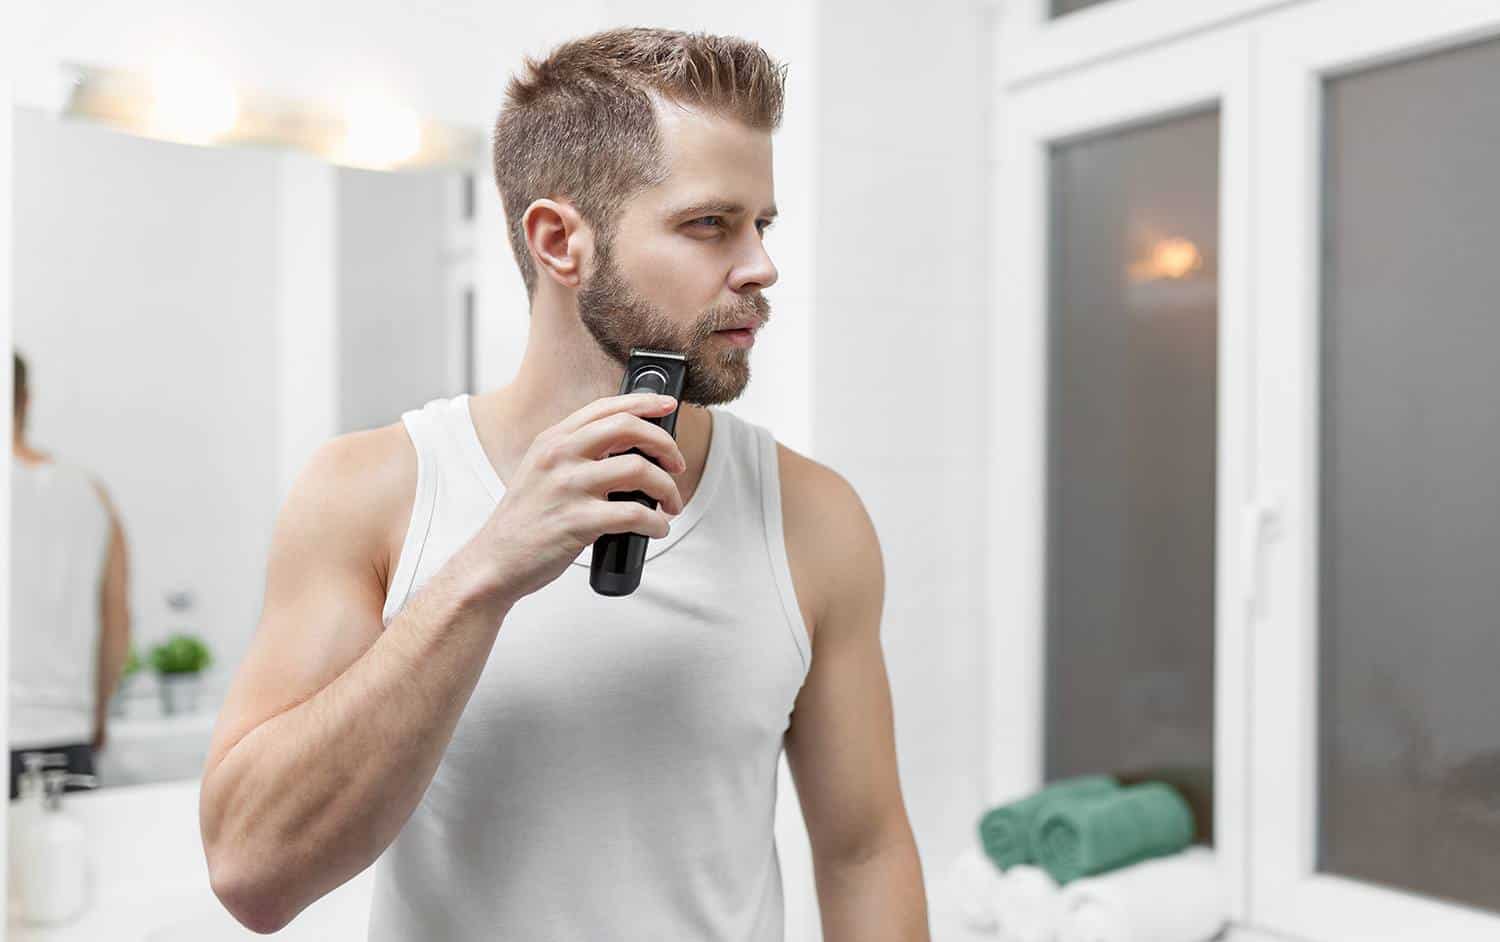 Can A Trimmer Be Used By Two People?